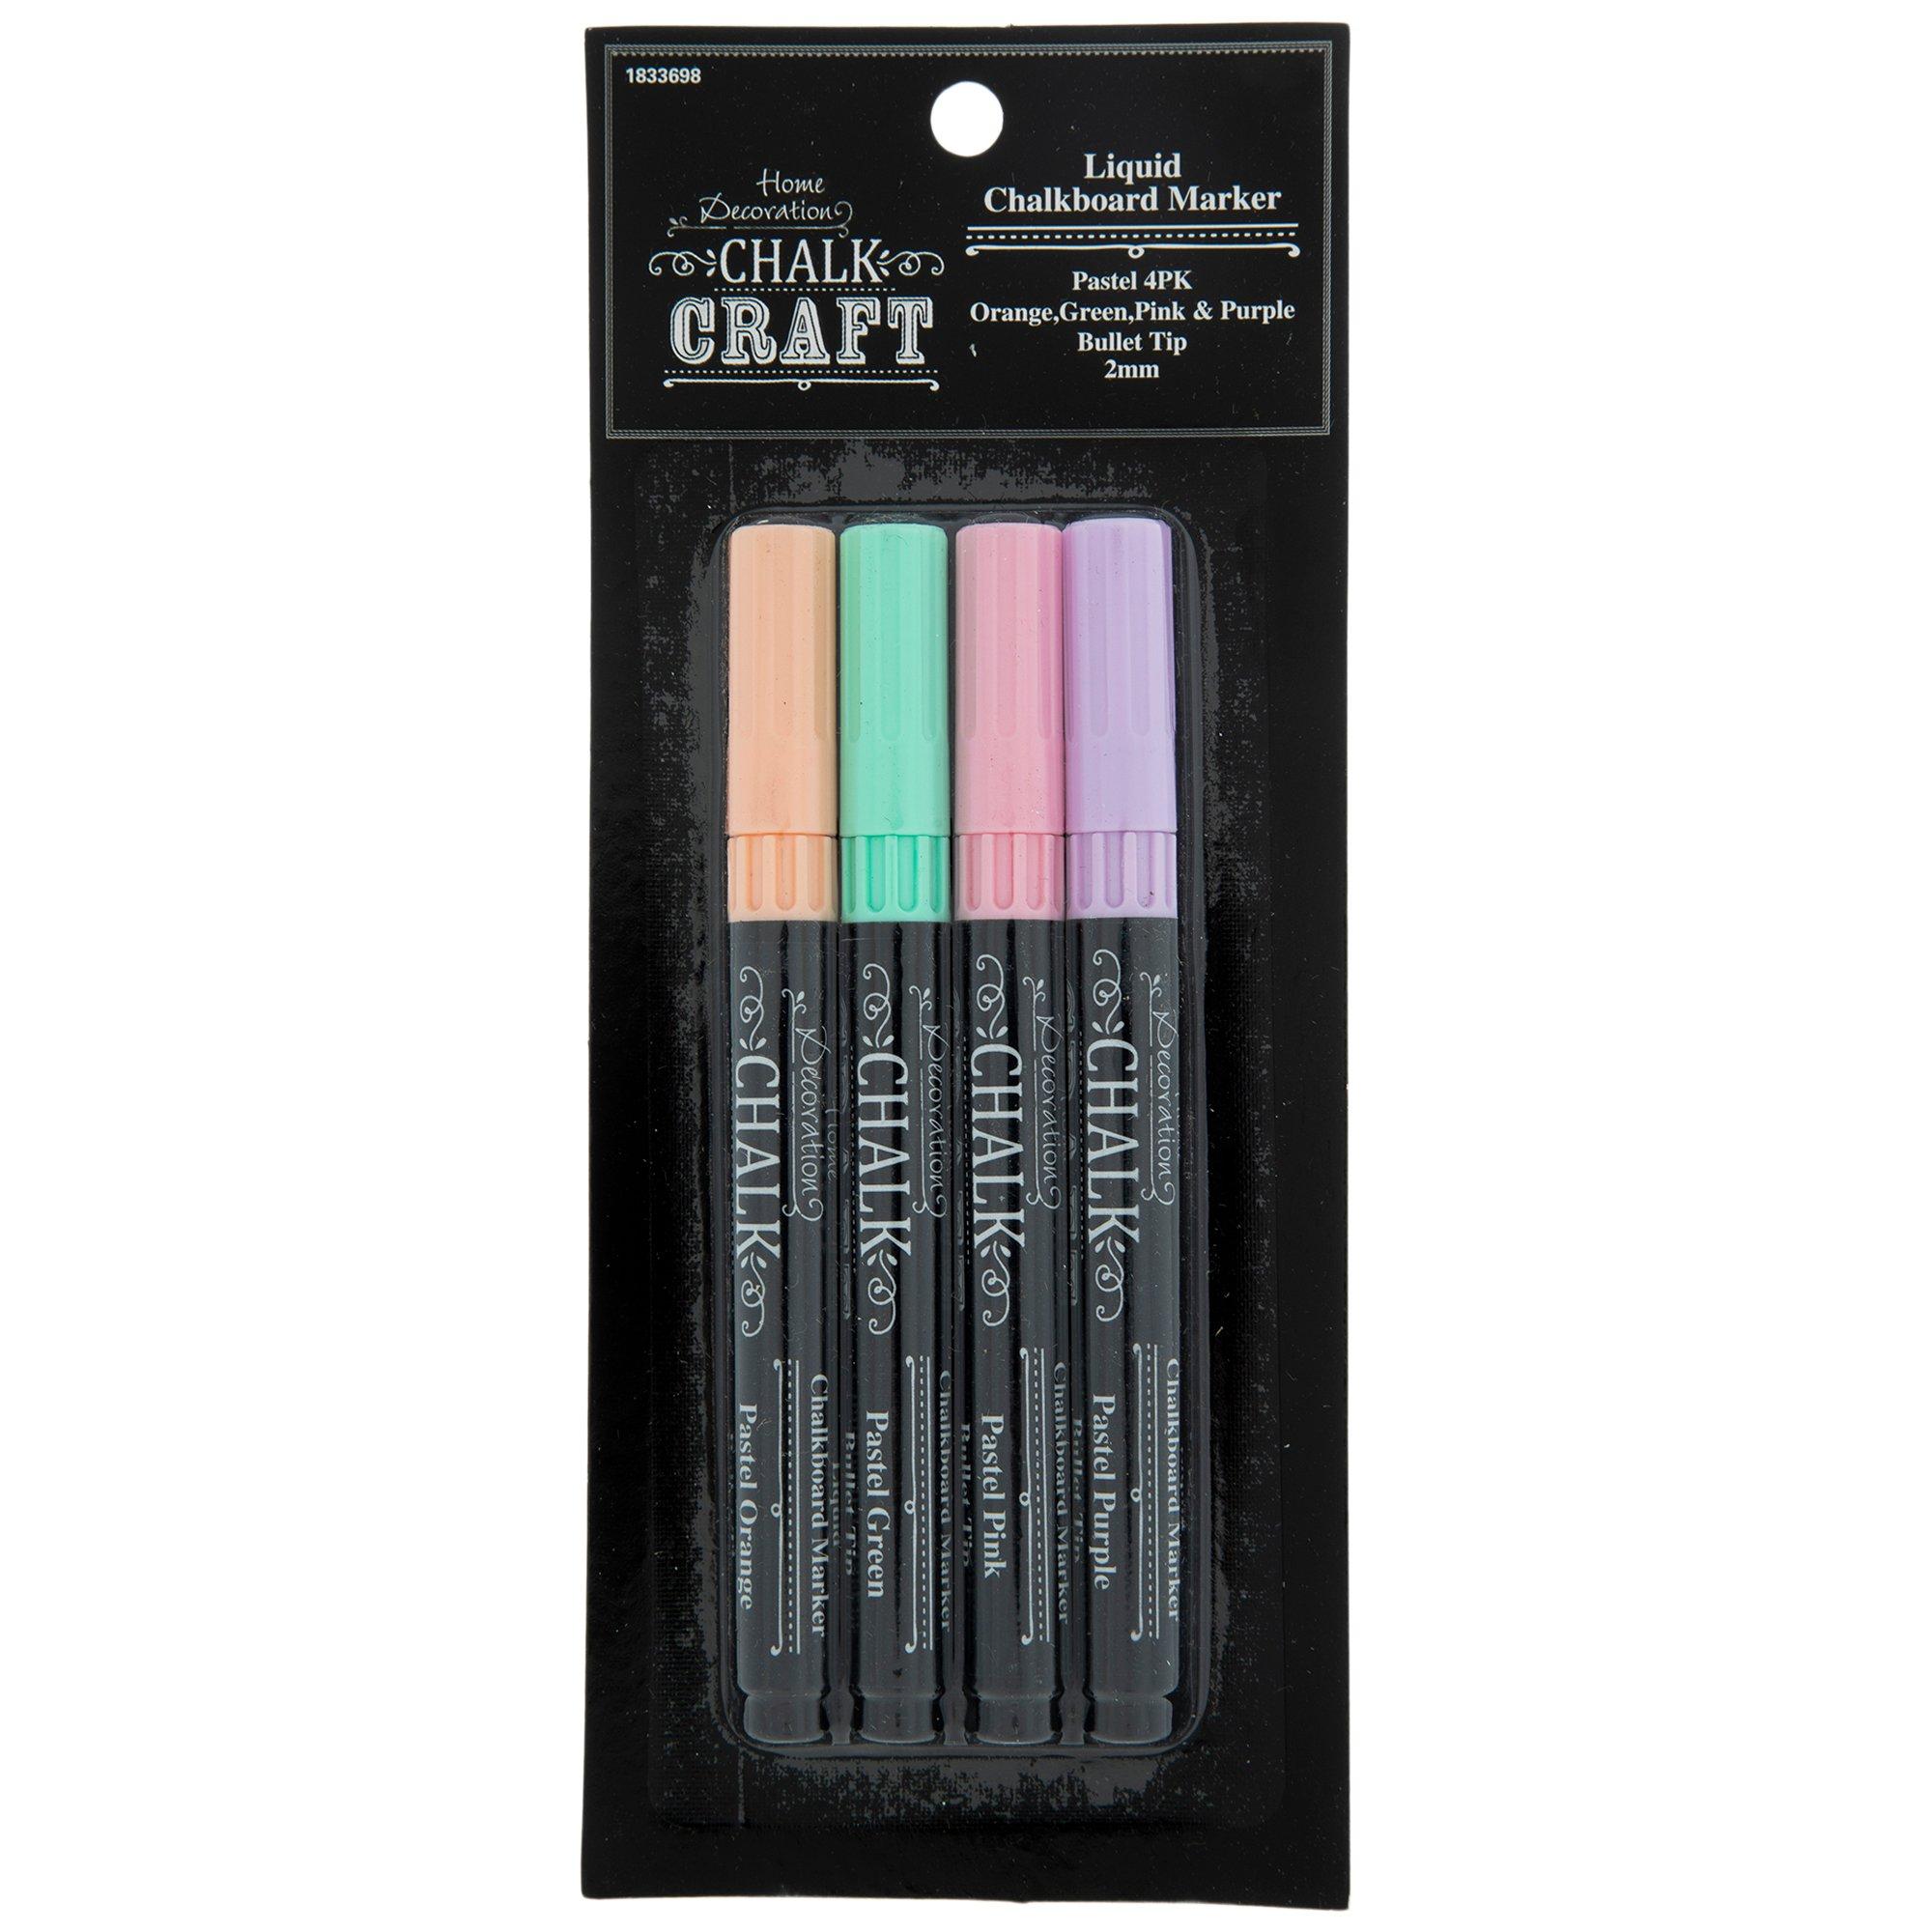 Custom Chalkboard Markers - Chalk Pens and Markers